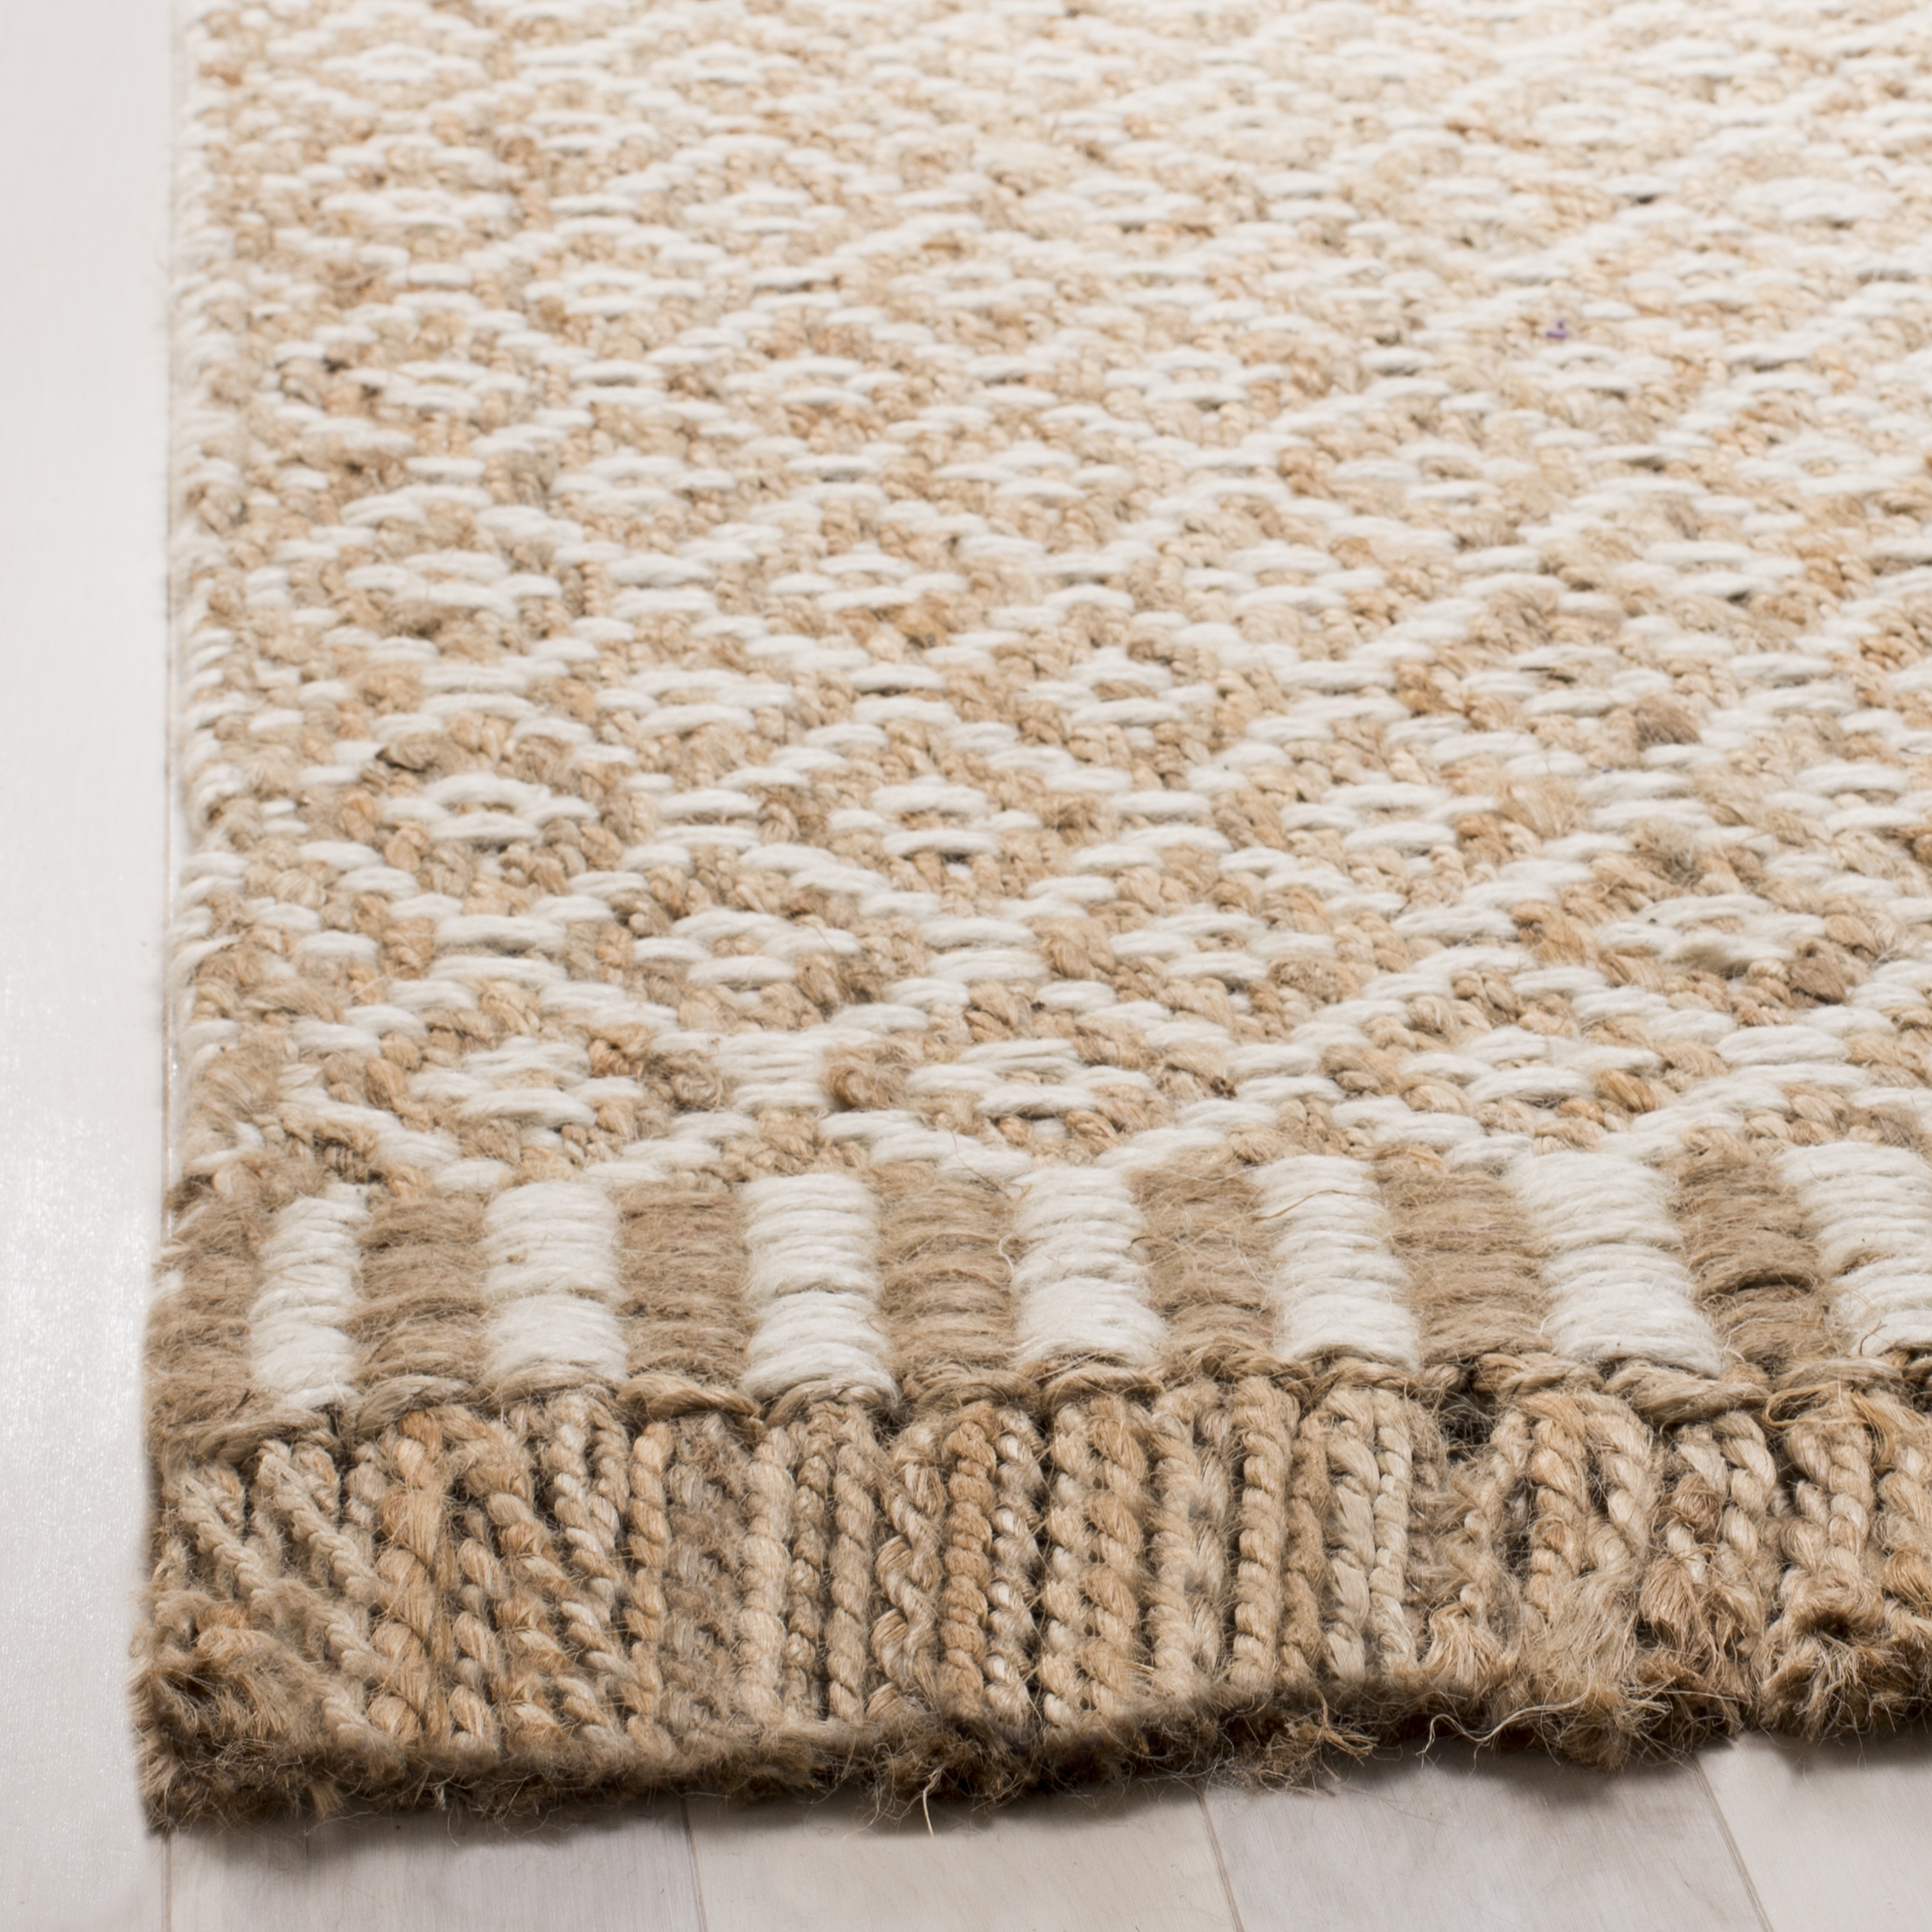 Arlo Home Hand Woven Area Rug, NF182A, Natural/Ivory,  3' X 5' - Image 2